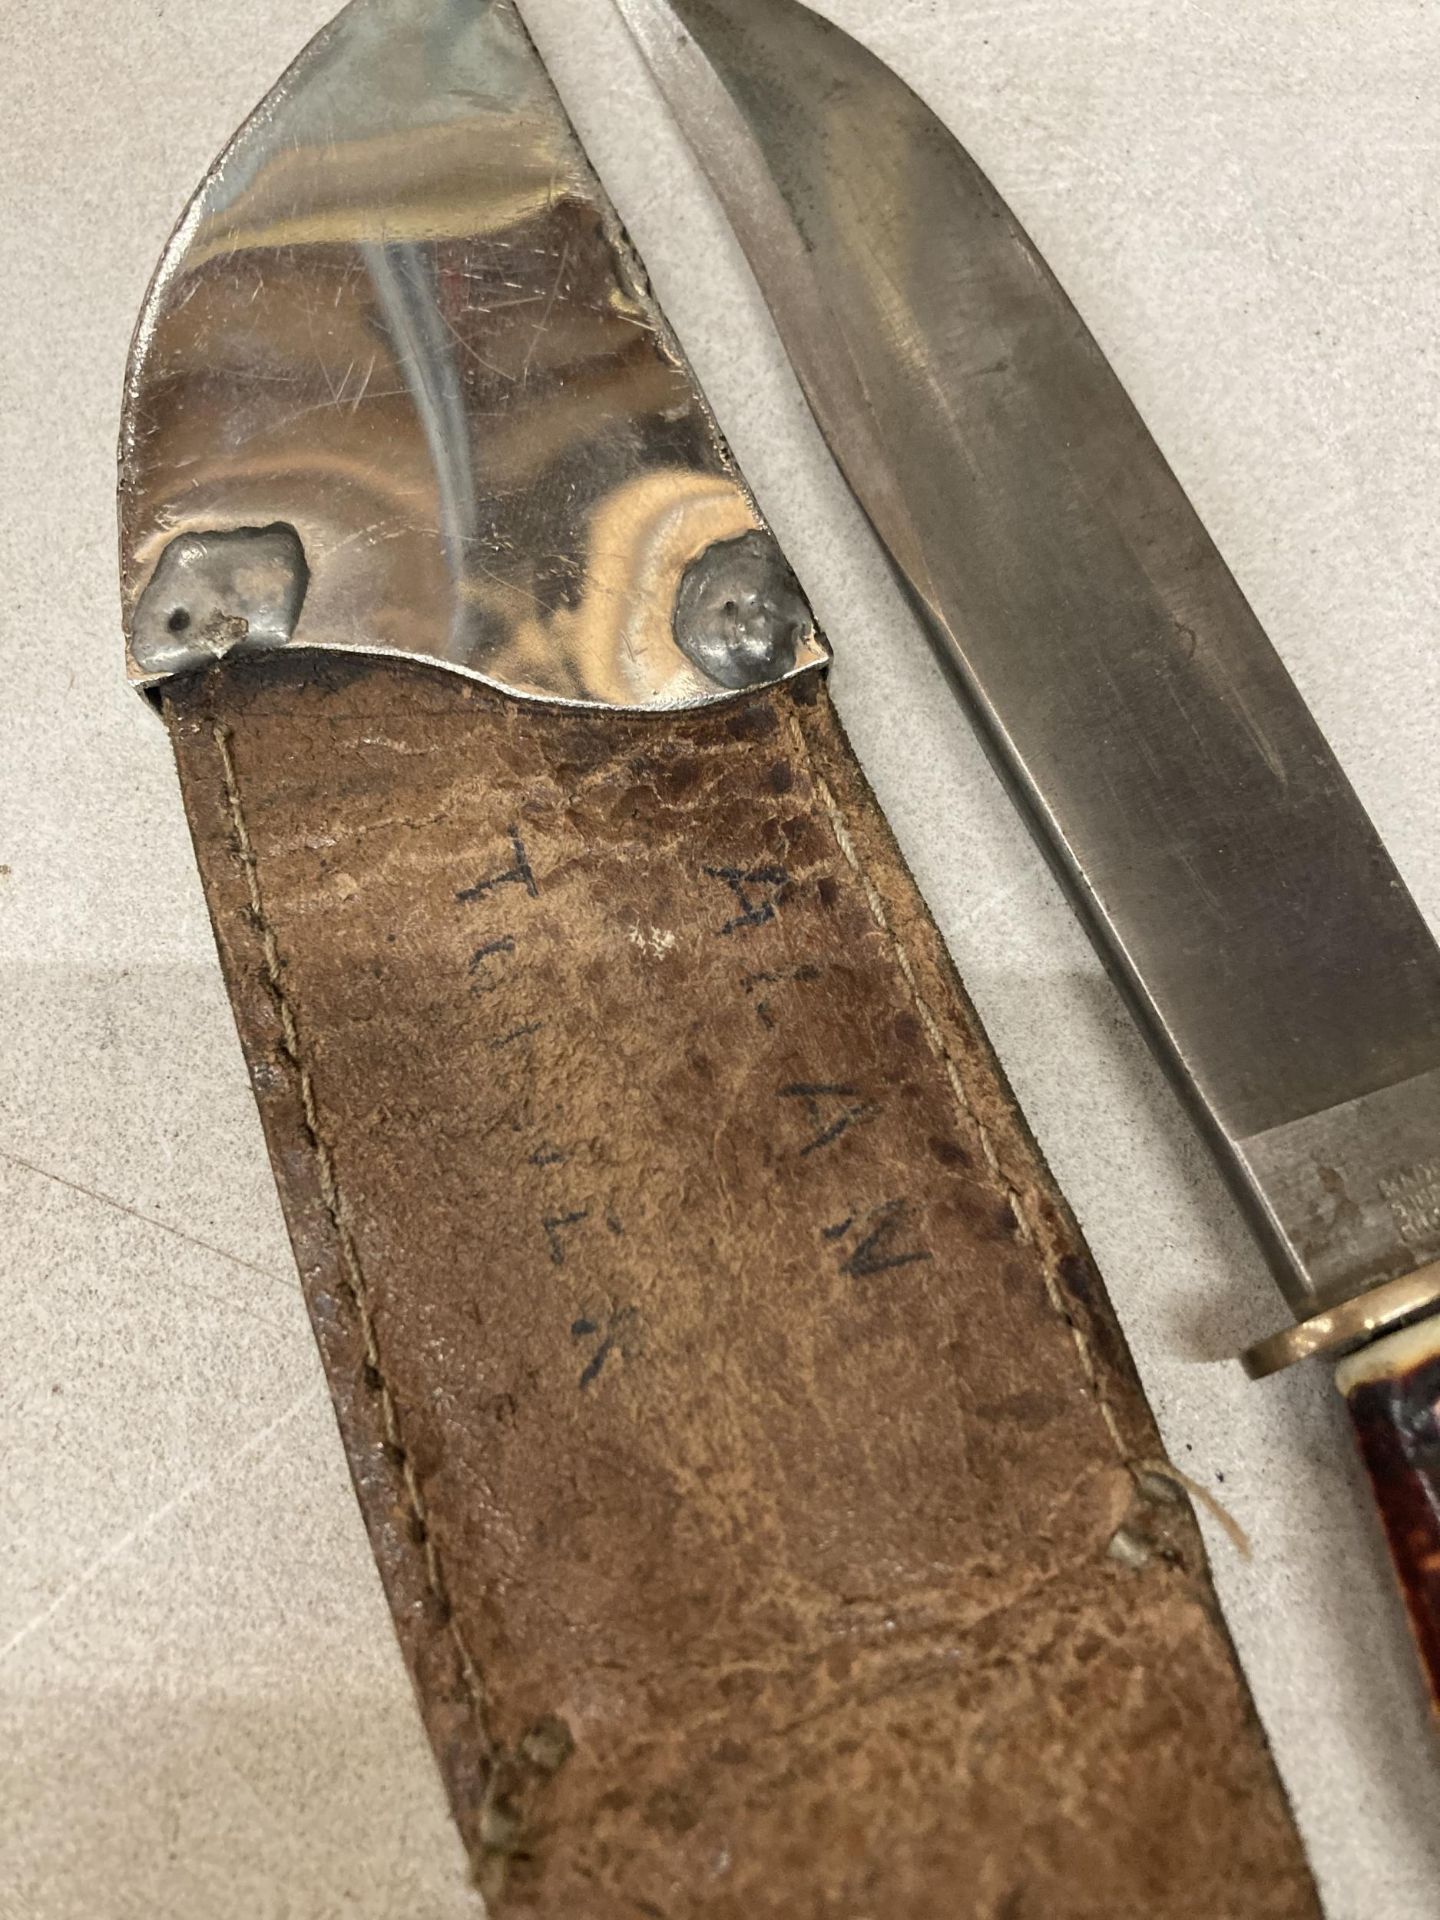 A WILLIAM RODGERS 1950'S SCOUT KNIFE - Image 3 of 3